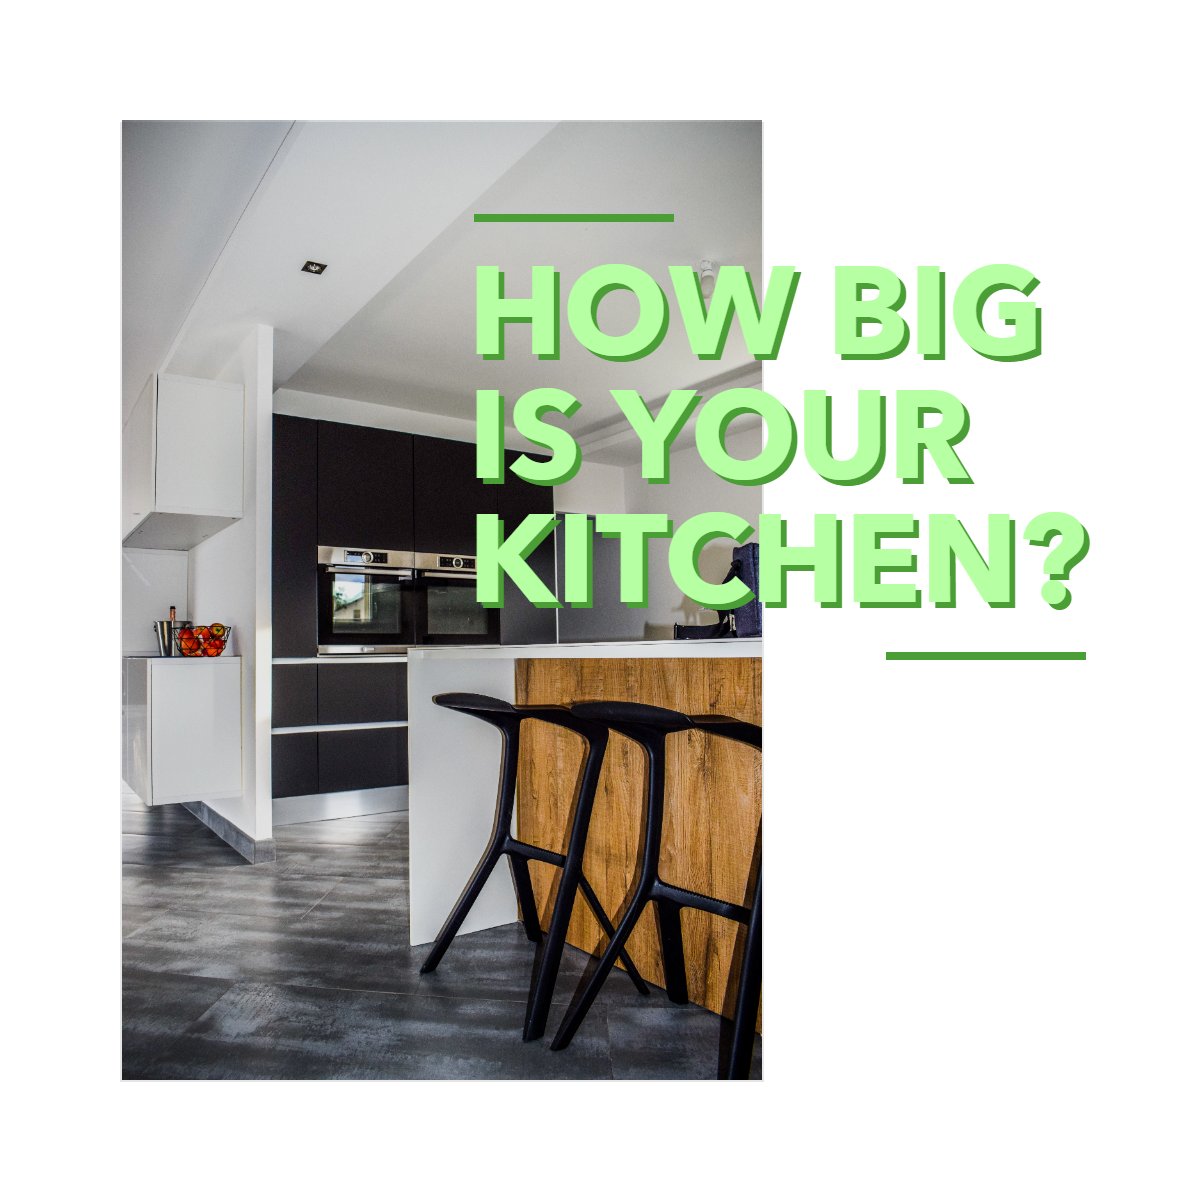 In the US, the average kitchen size for single homes is 161 square feet.

How big is your kitchen? 

#realestate    #kitchensize    #kitchen    #homes
#brokerjones #Flossmoor #homewood #homewoodflossmoor #district233 #manifesthomes #FSBO #FreeCMA #fixandflip